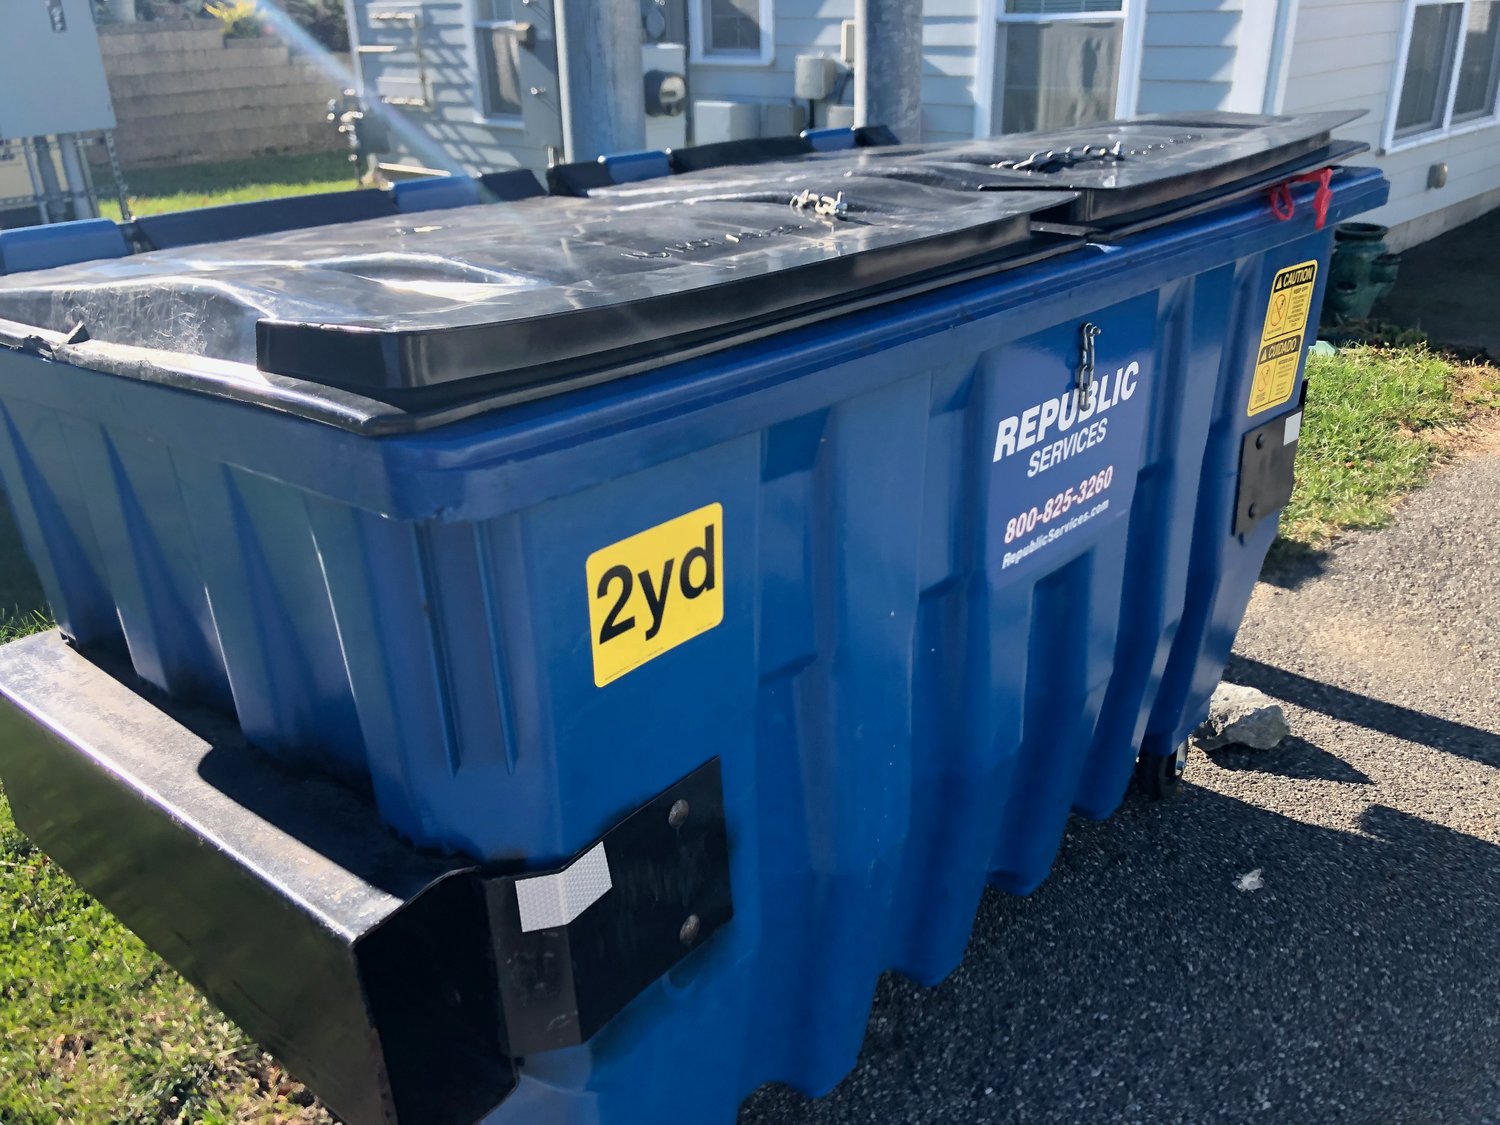 Some residents of Quaker Manor/Quaker Estates say it’s difficult for elderly tenants, or those with disabilities, to lift open the top of the dumpsters, and that the large recycling bin is too far away from their apartments.